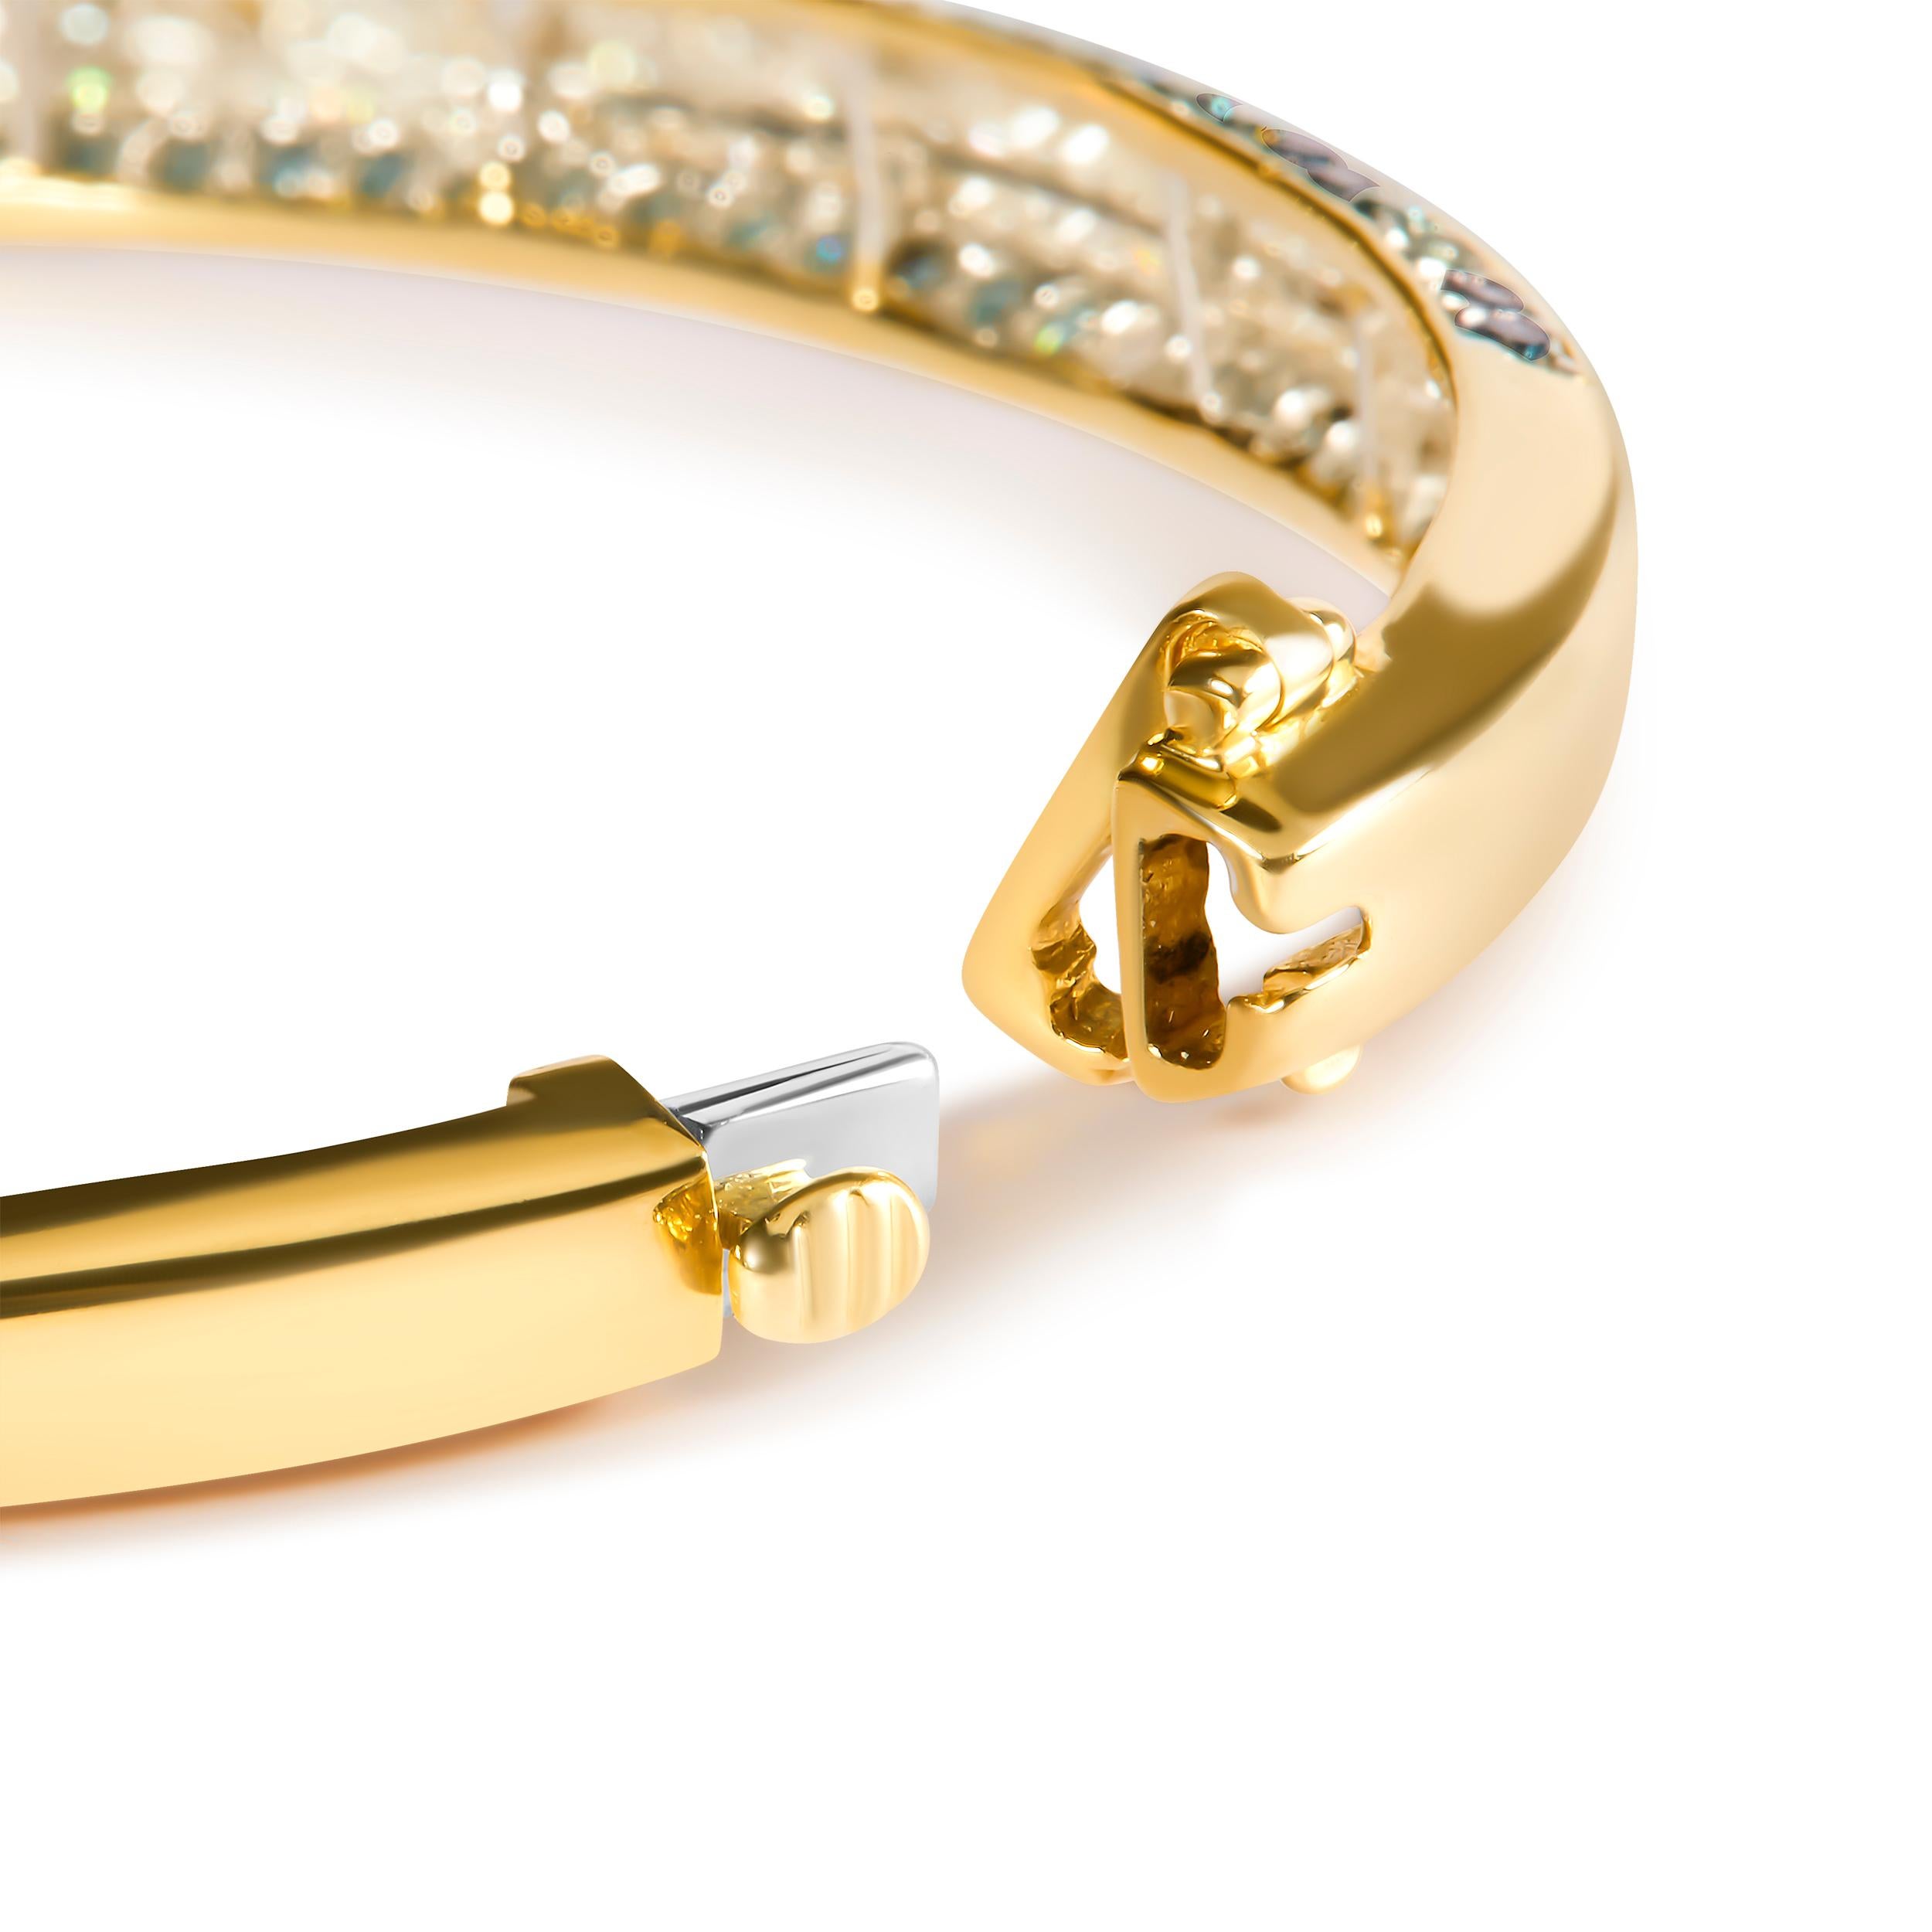 Indulge in the beauty of this 14K Yellow Gold Bangle Bracelet adorned with 142 Natural Princess-cut Diamonds totaling 2.0 Cttw. The treated Blue and White Diamonds are set in a Channel setting, showcasing their H-I Color and SI2-I1 Clarity. This